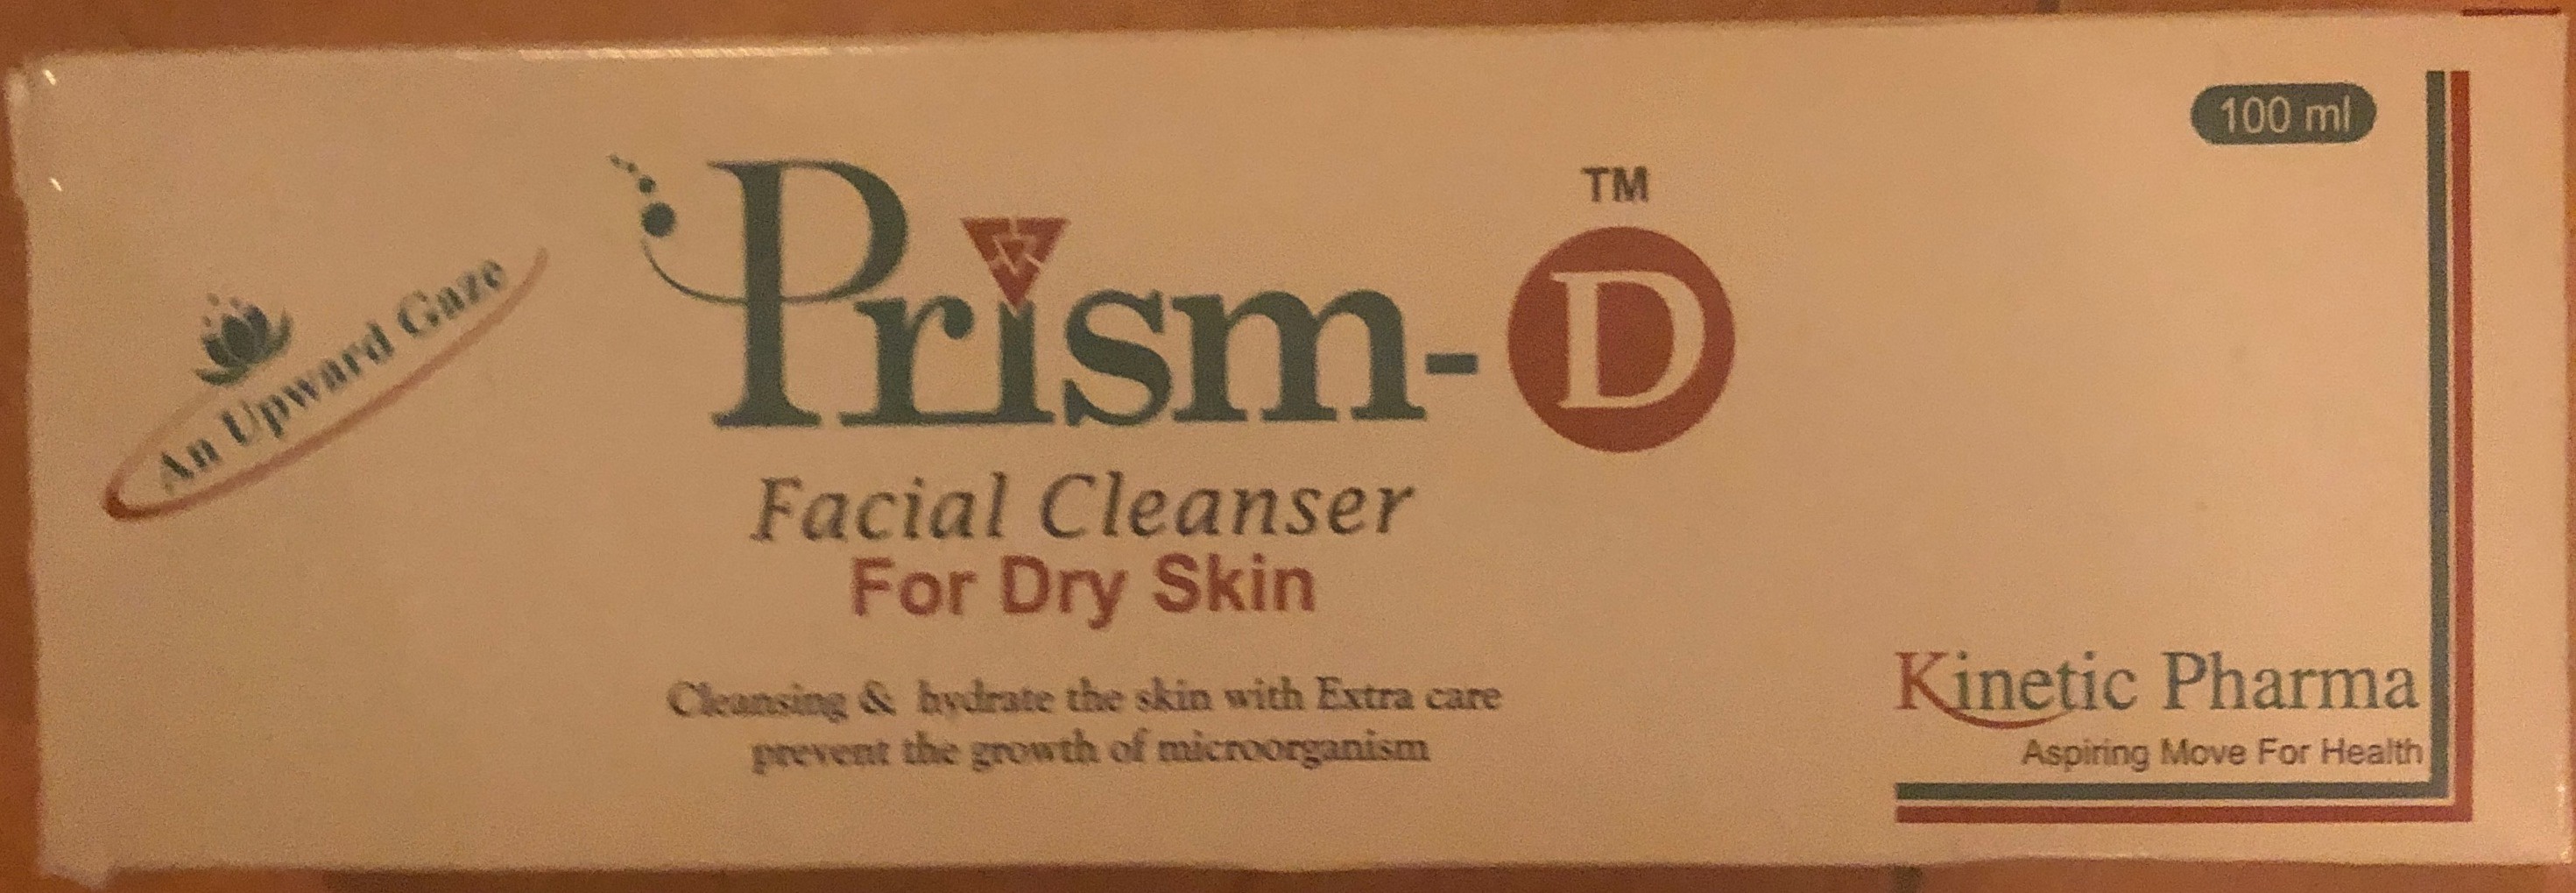 Kinetic Pharma Prism D Facial Cleanser for Dry Skin